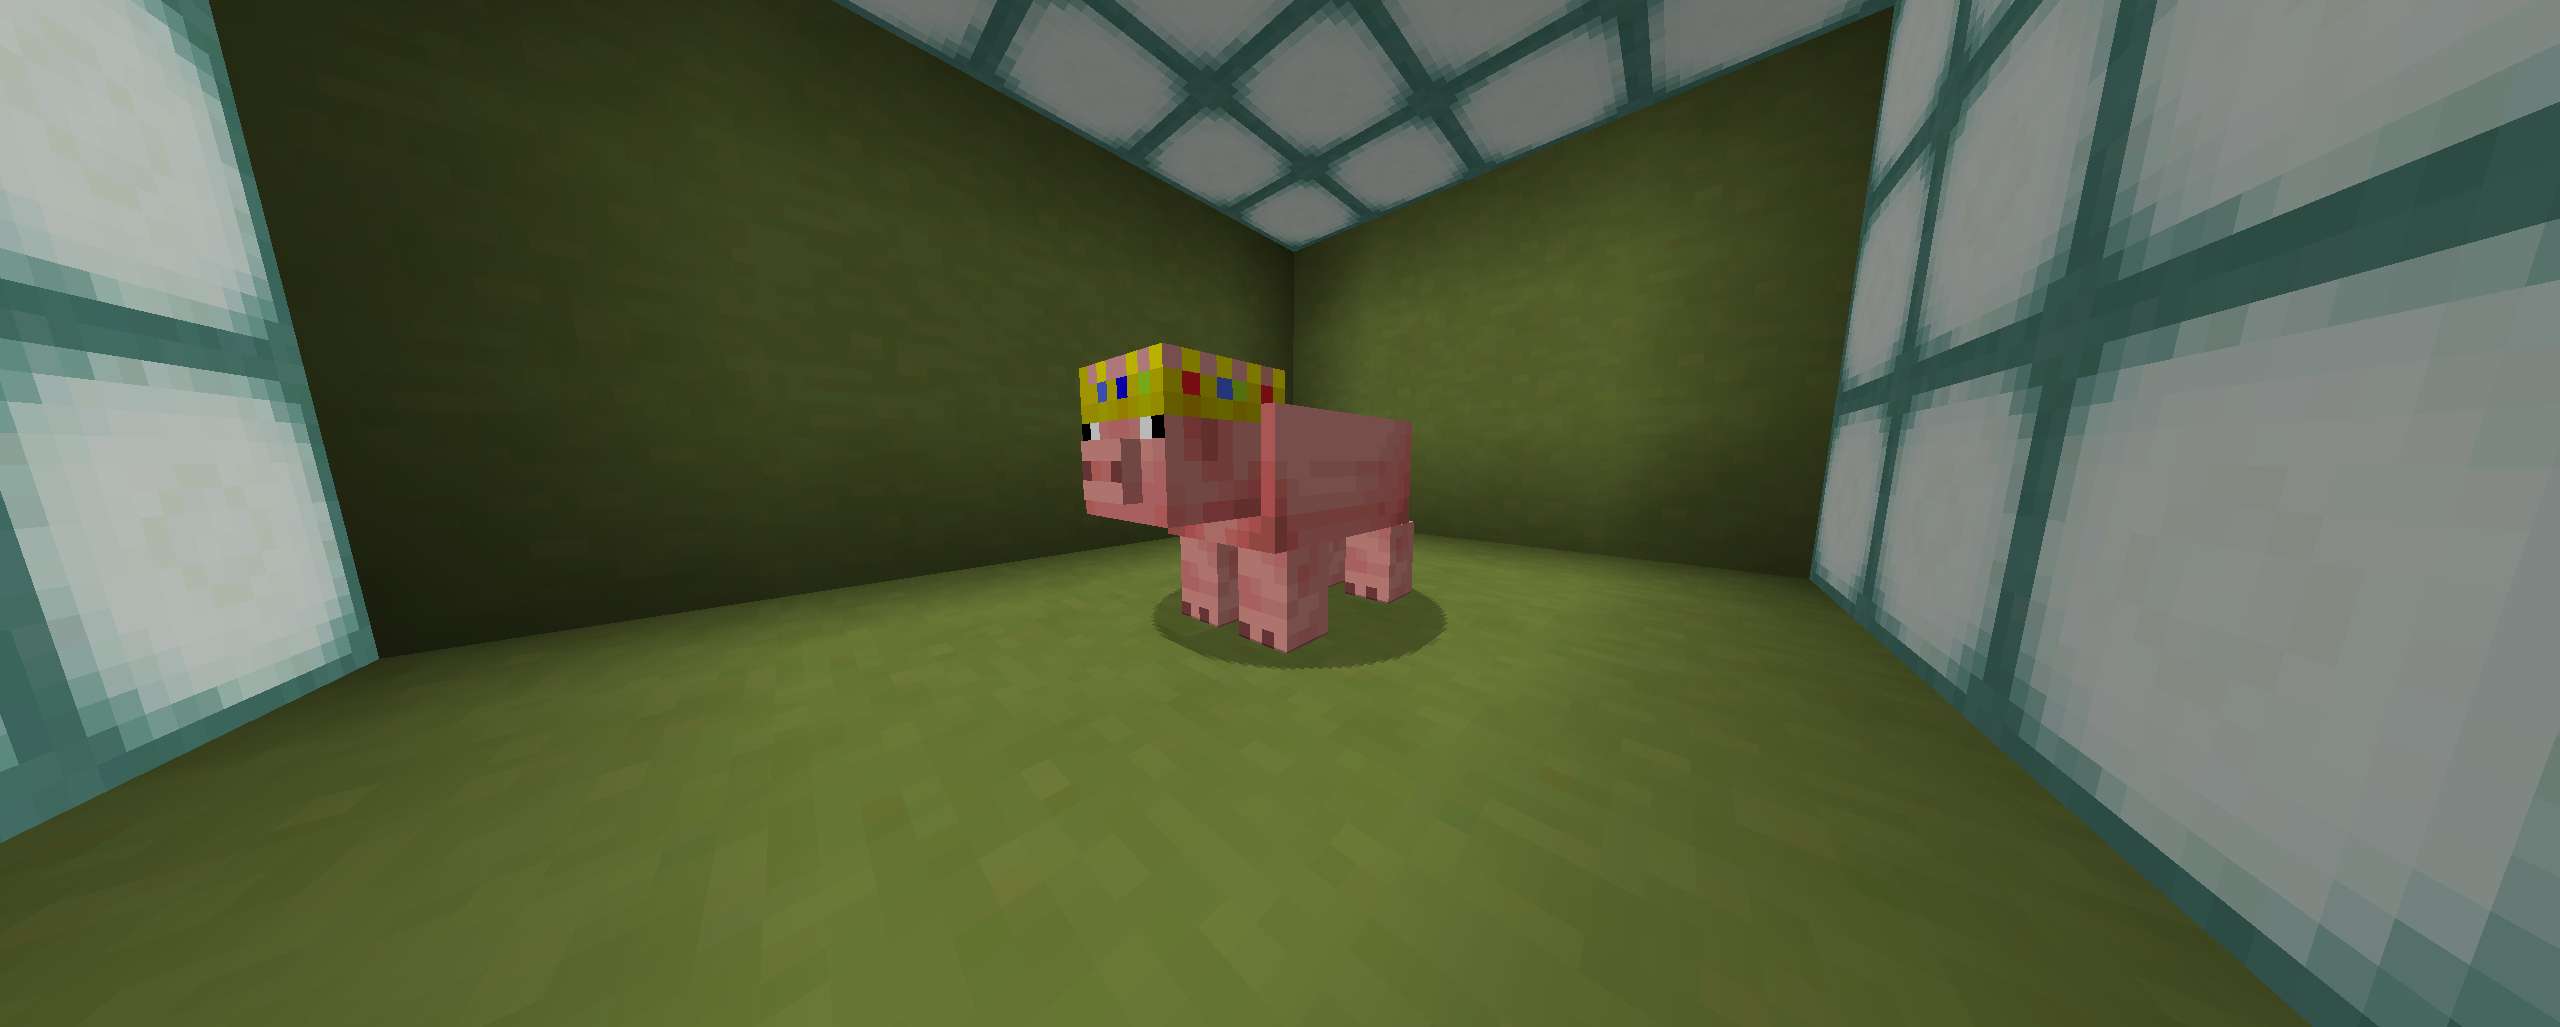 Gallery Image 1 for Technoblade Pigs - 2D  on vVPRP